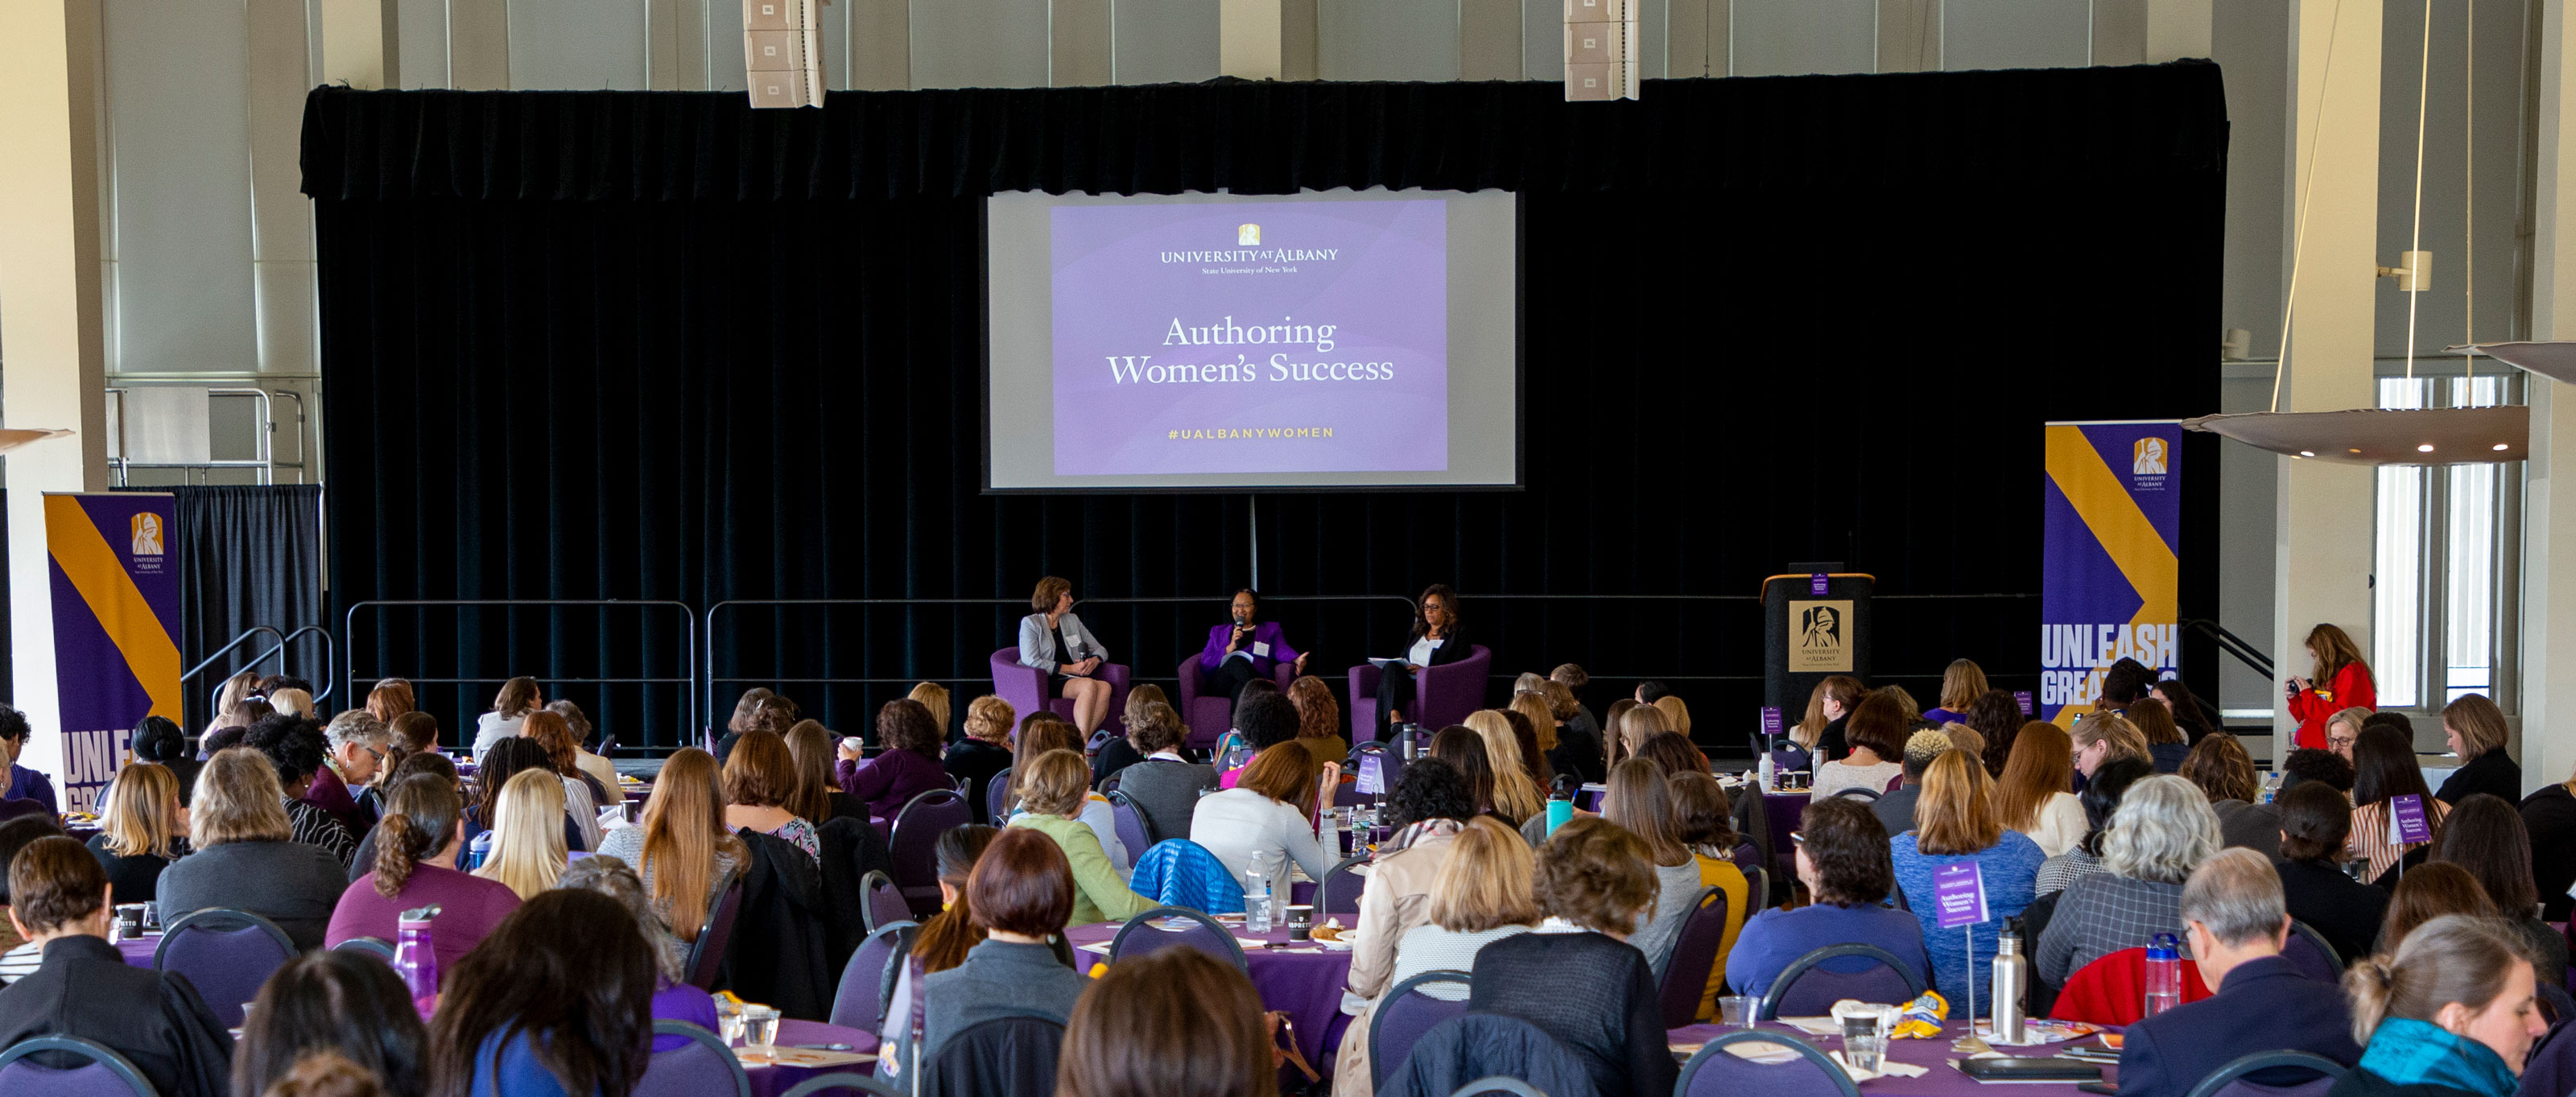 An audience seated at round tables listens as a panel of three women speak at the Authoring Women’s Success event.